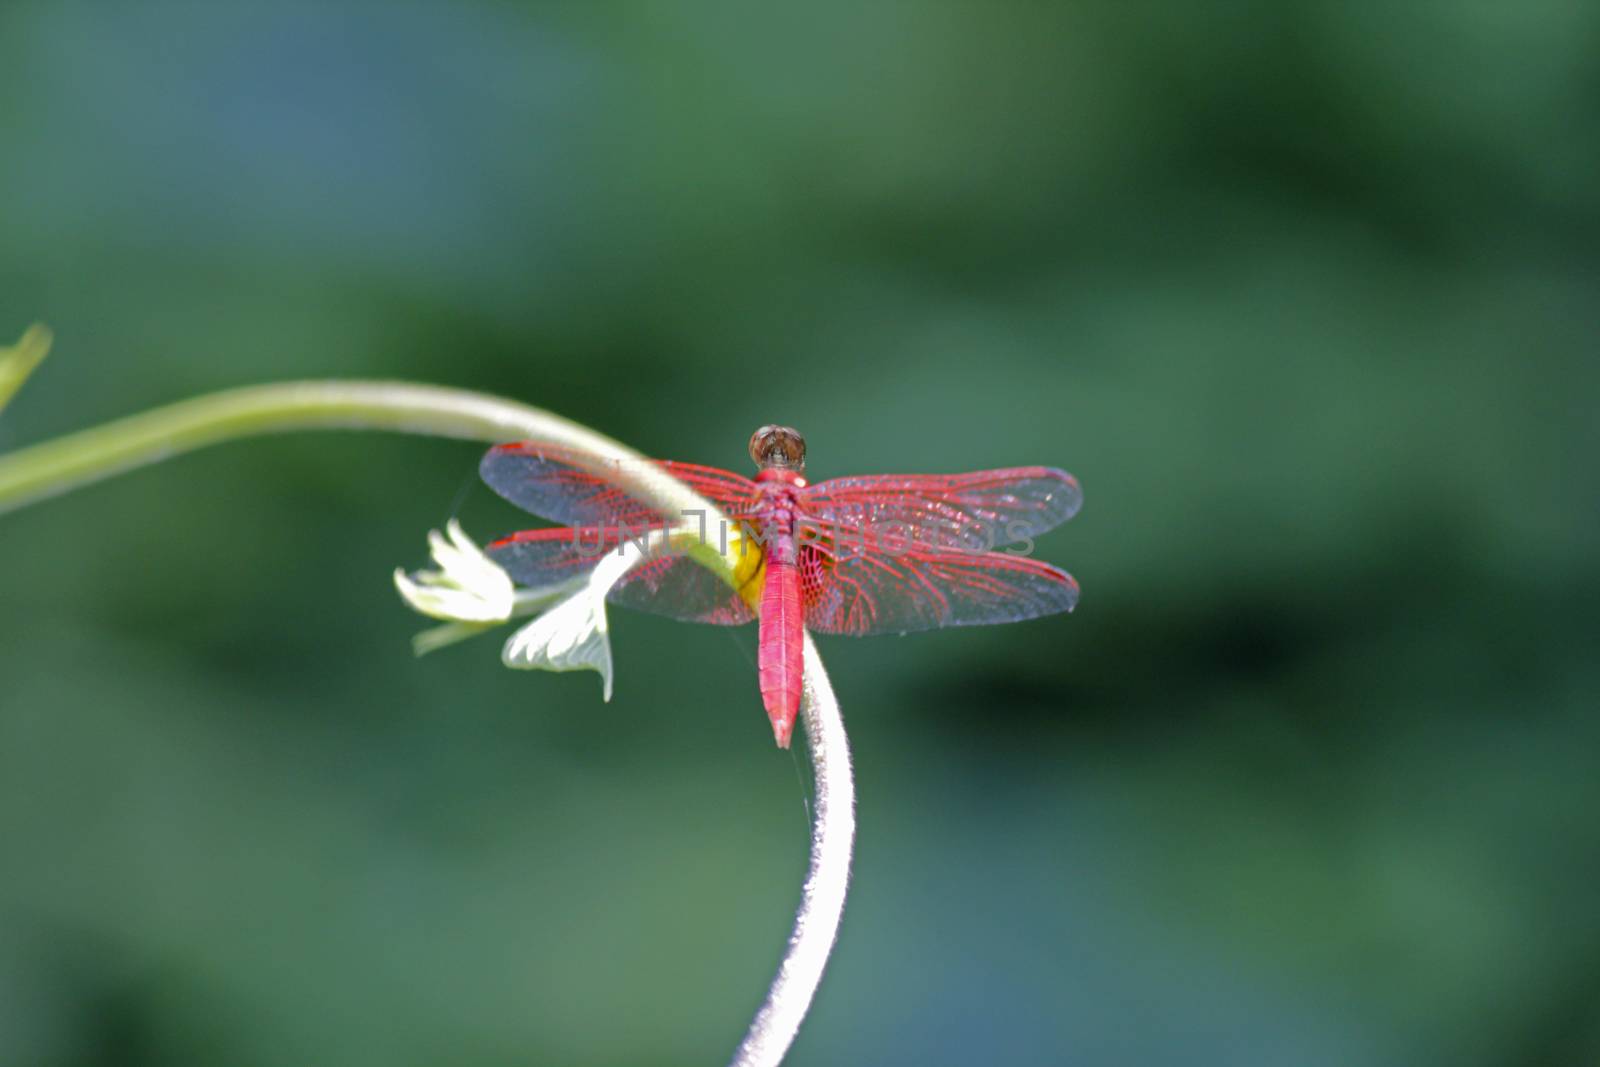 Scarlet dragonfly, Crocothemis erythraea by yands